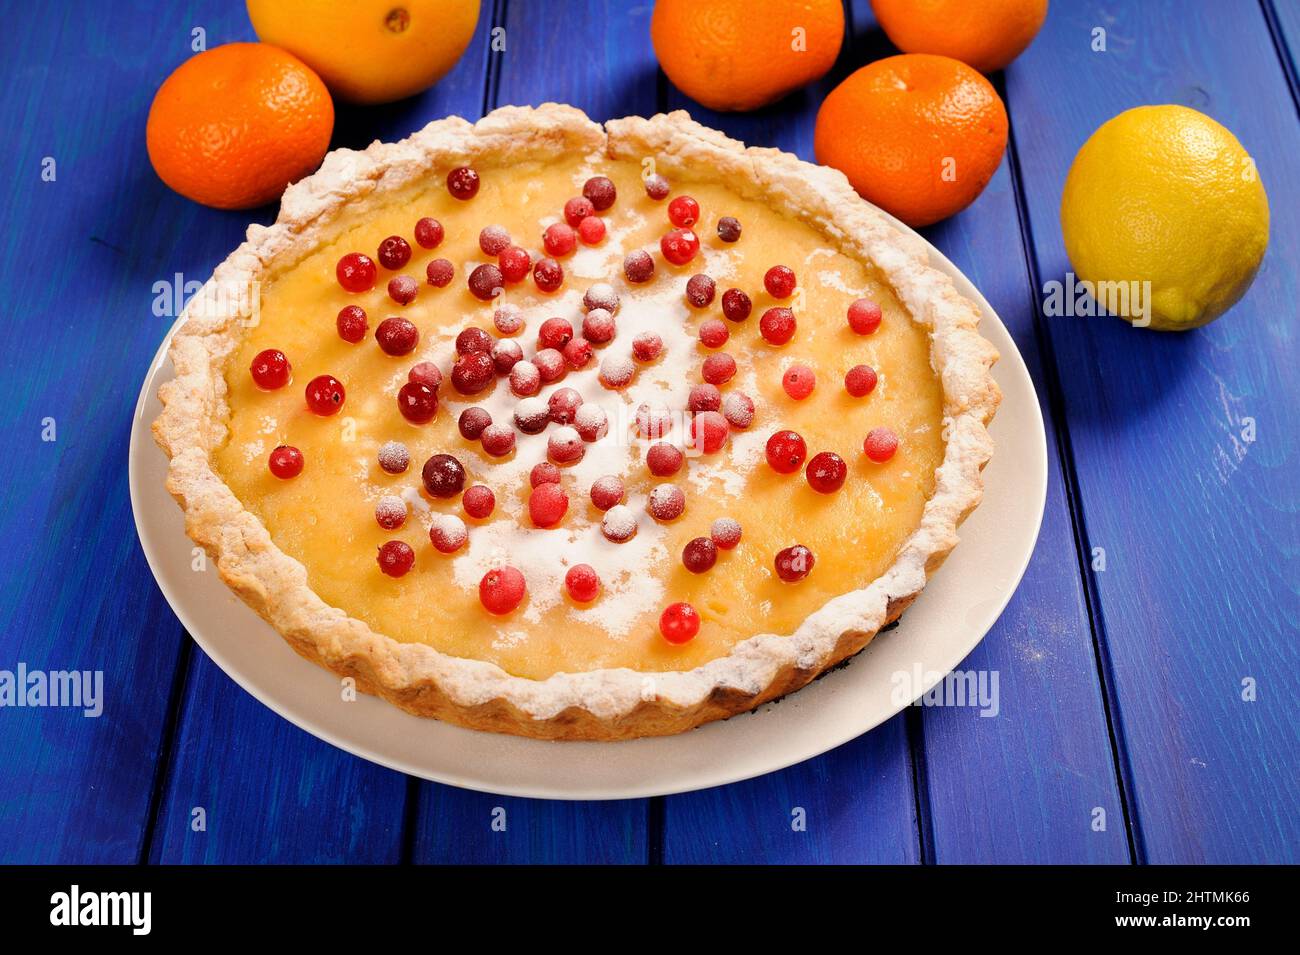 Tasty lemon pie decorated with fresh cranberries and whole orange, lemon and clementines on deep blue table horizontal Stock Photo